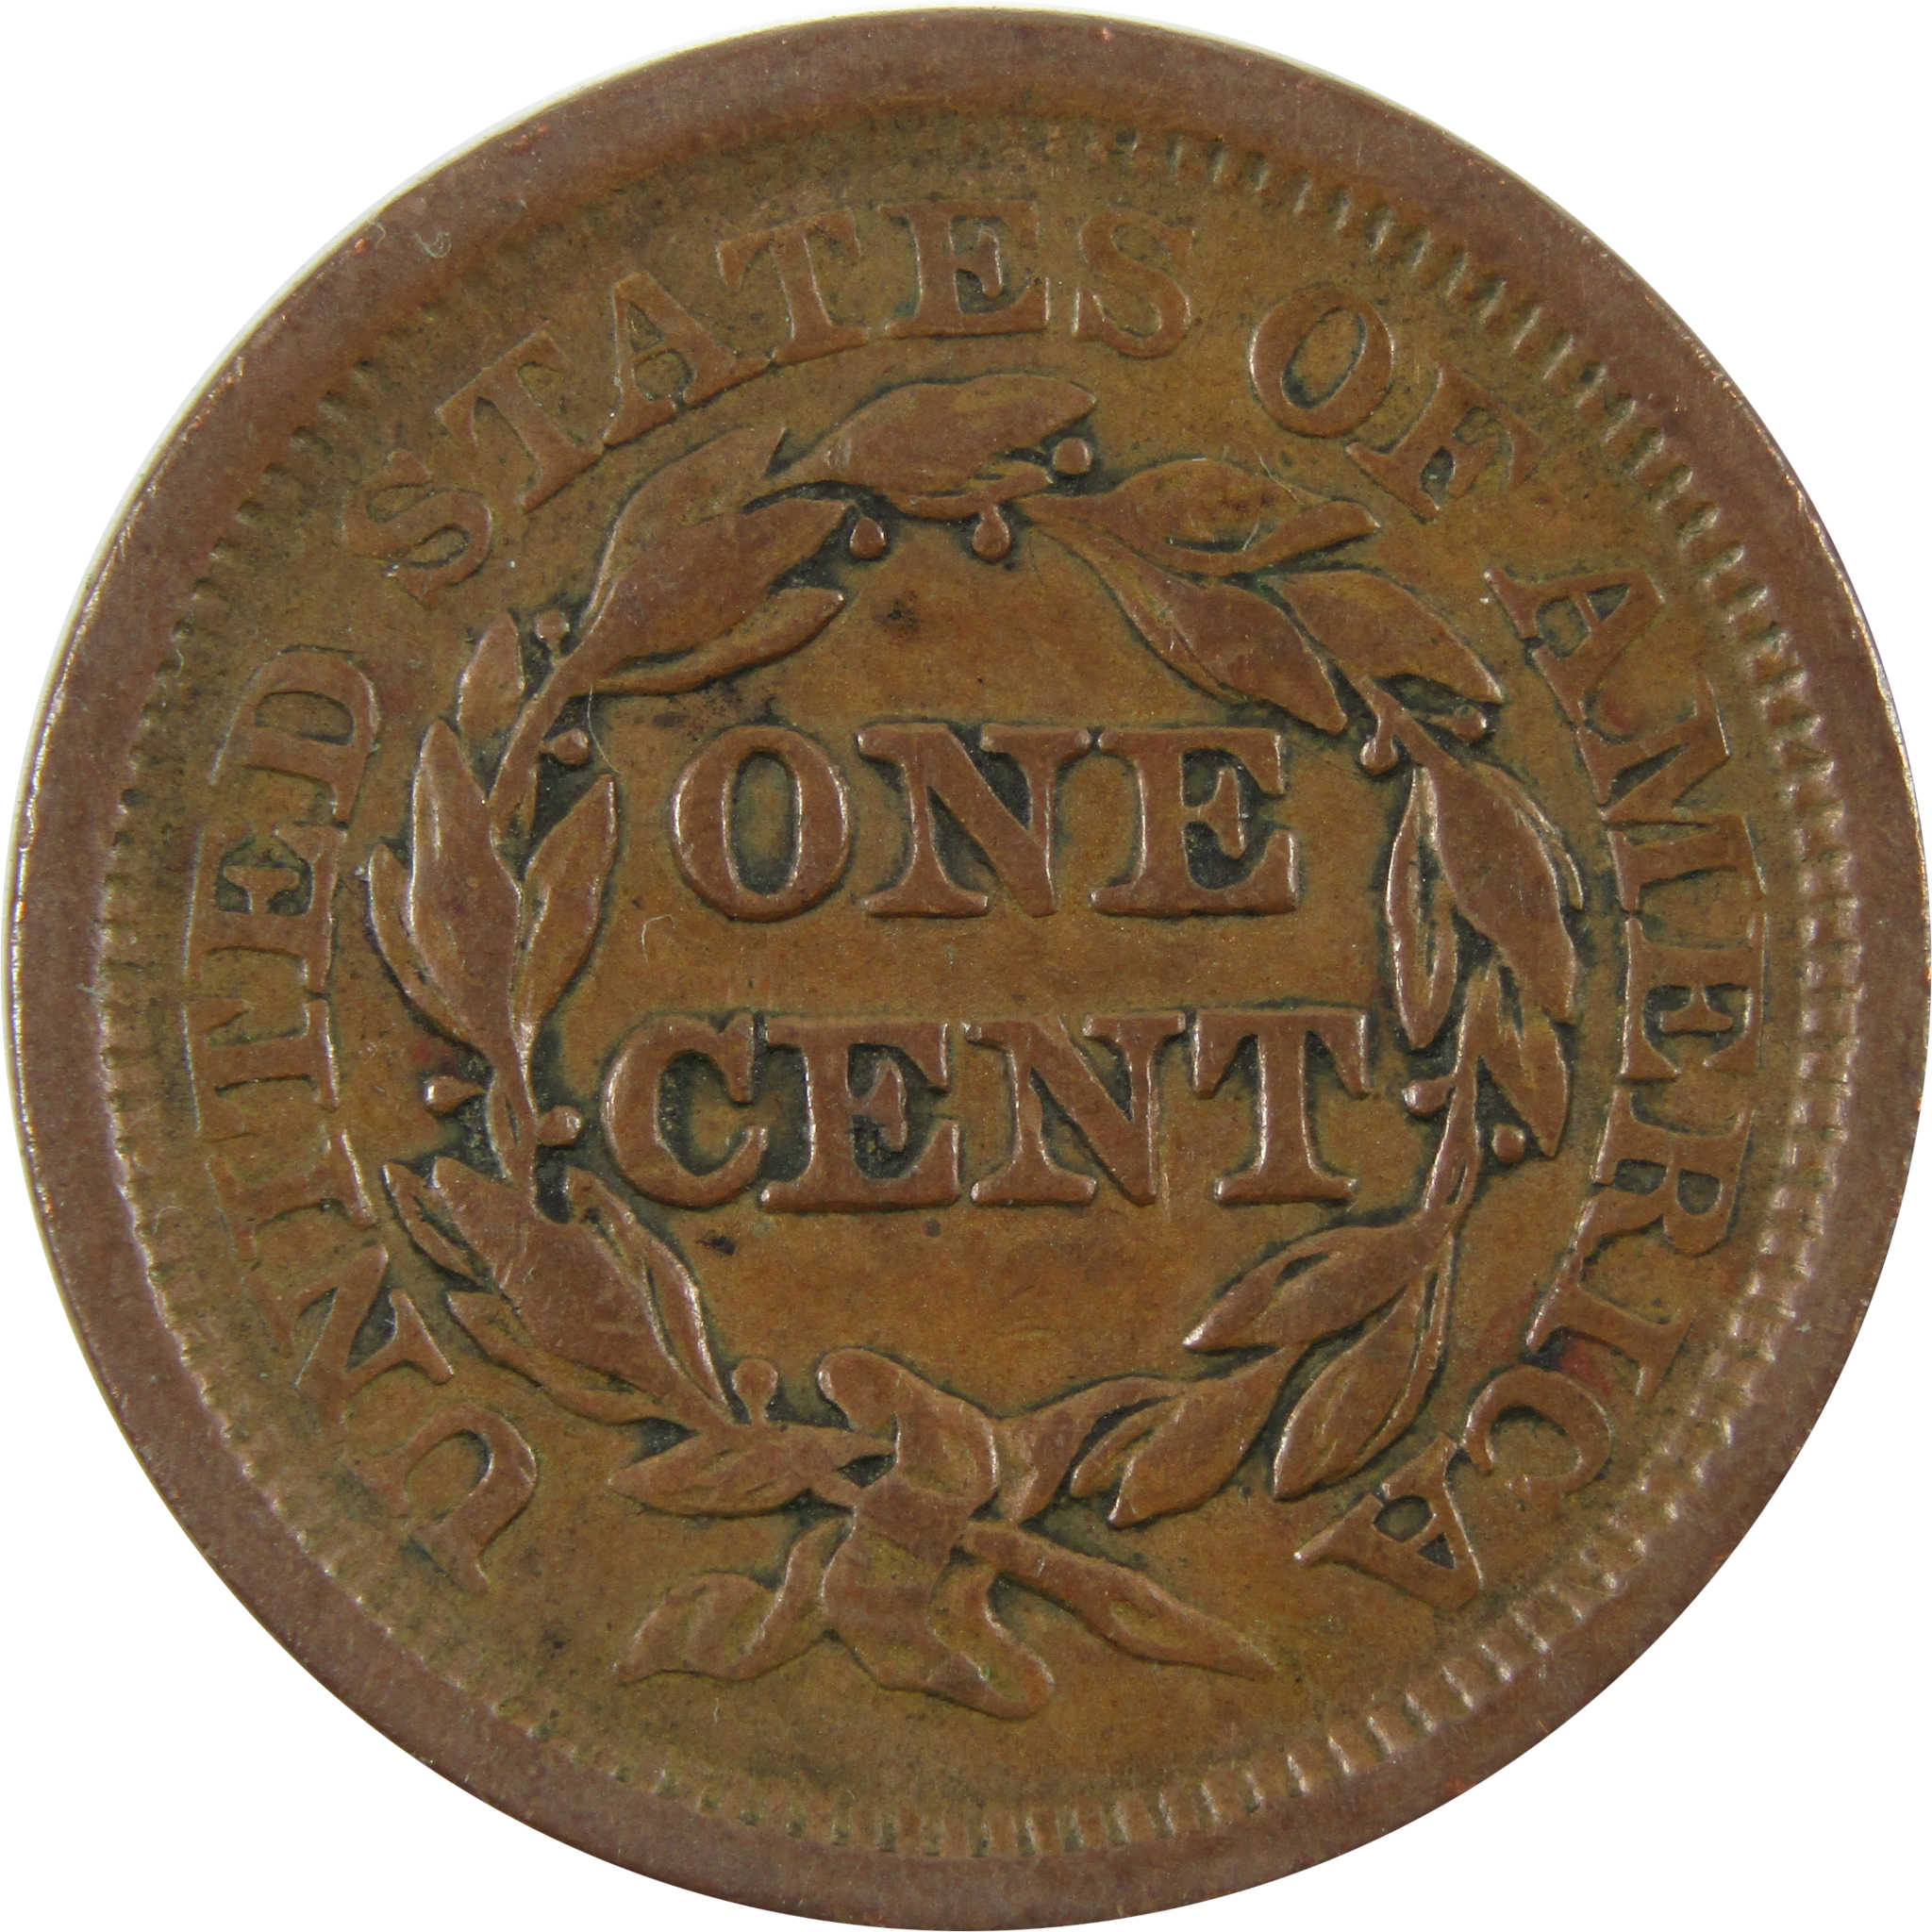 1849 Braided Hair Large Cent VF Very Fine Copper 1c SKU:I7481